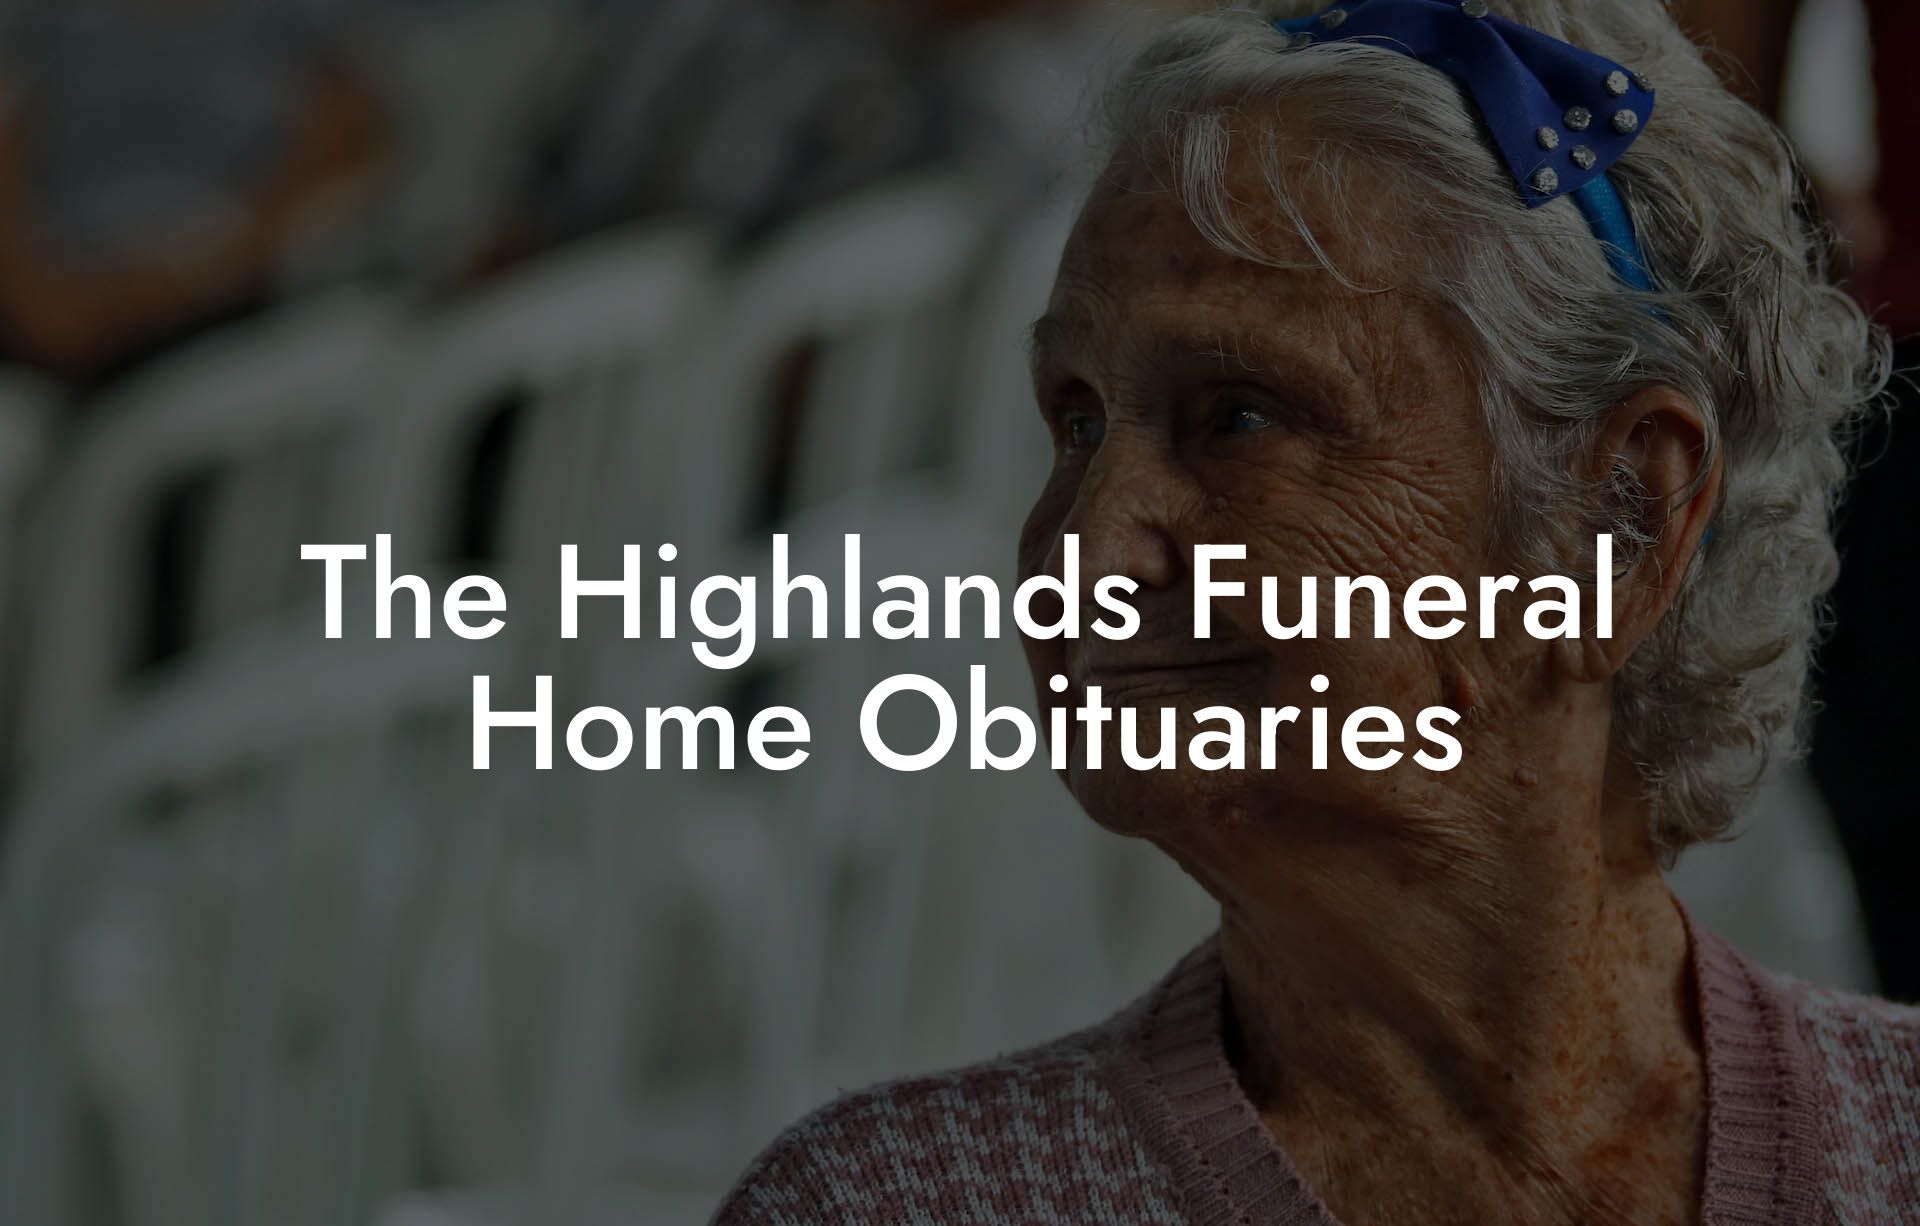 The Highlands Funeral Home Obituaries